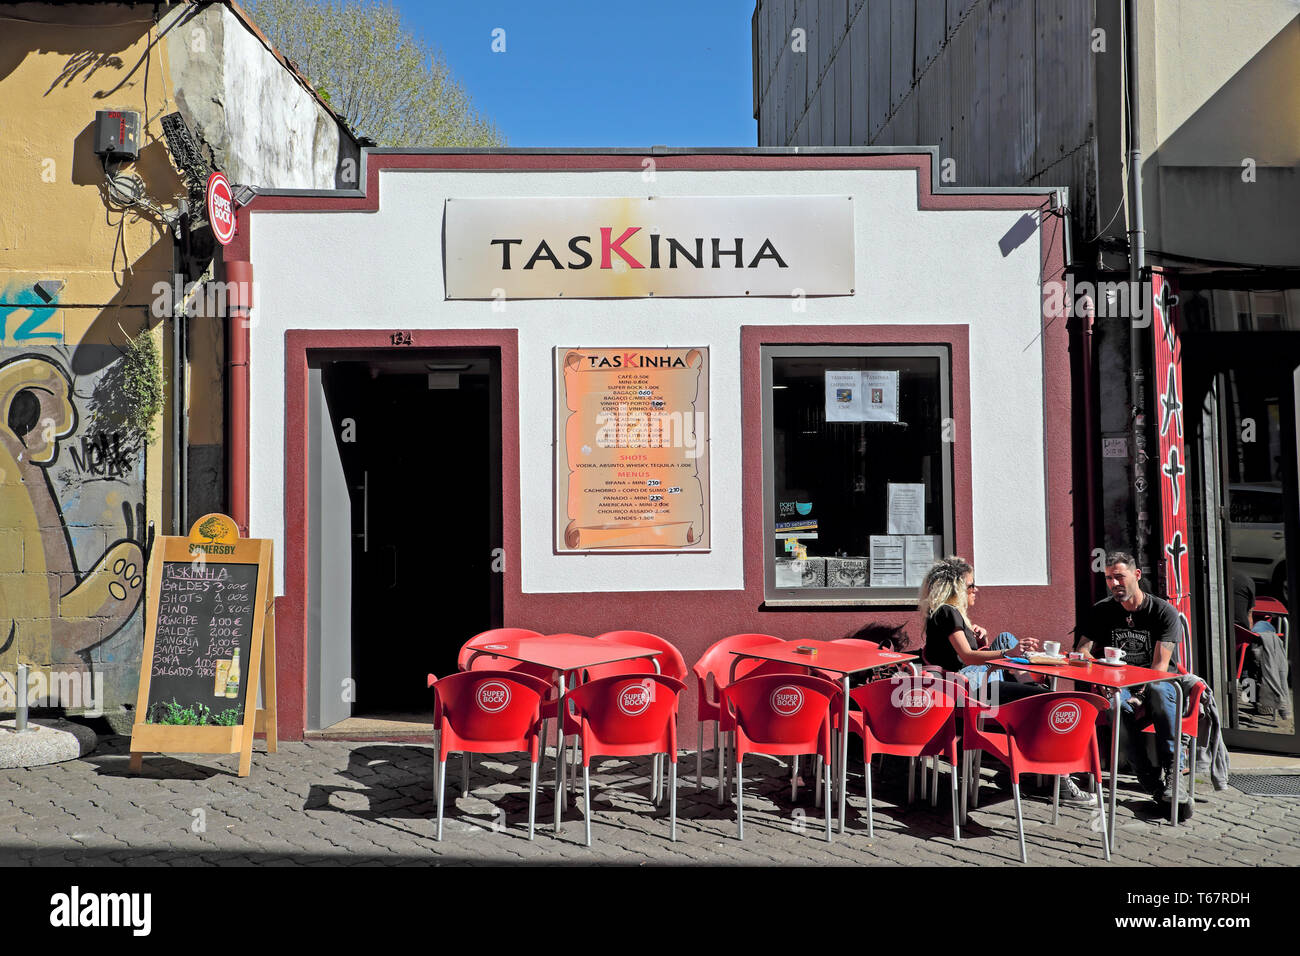 Exterior view of TasKinha bar and couple sitting outside at tables drinking in Porto, Oporto, Portugal   KATHY DEWITT Stock Photo